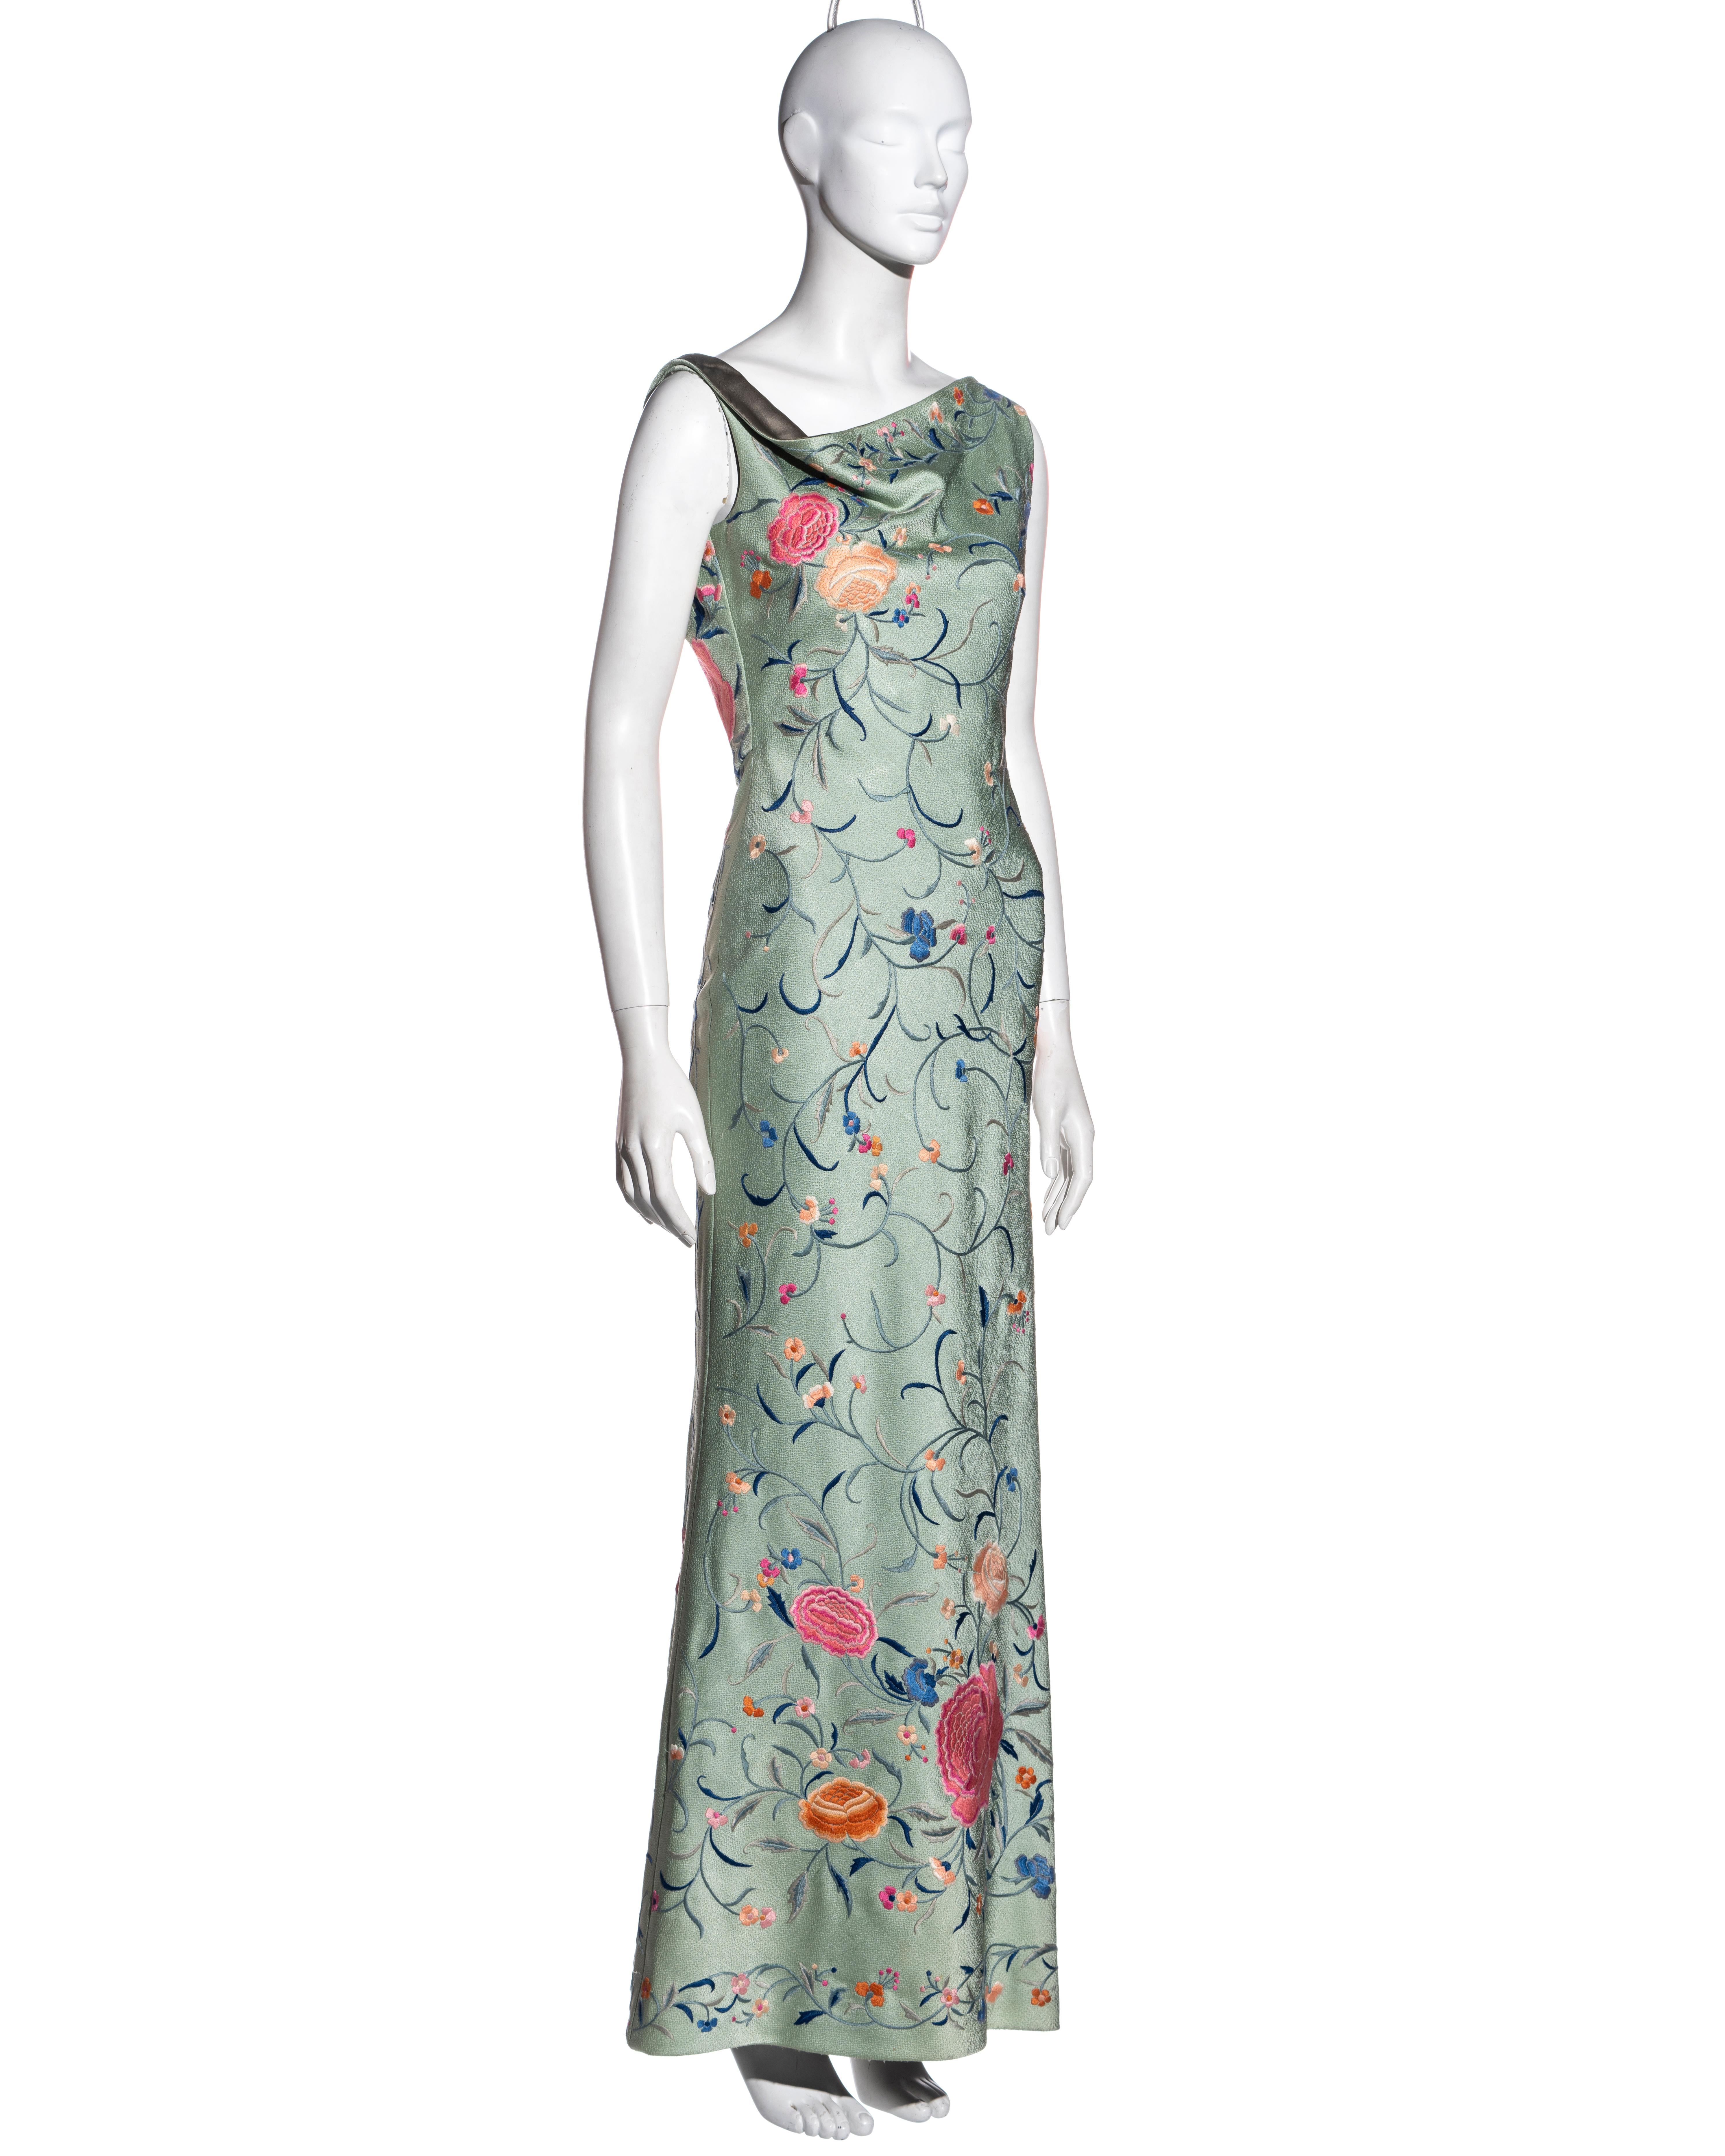 Christian Dior by John Galliano floral embroidered silk evening dress, fw 1997 For Sale 2